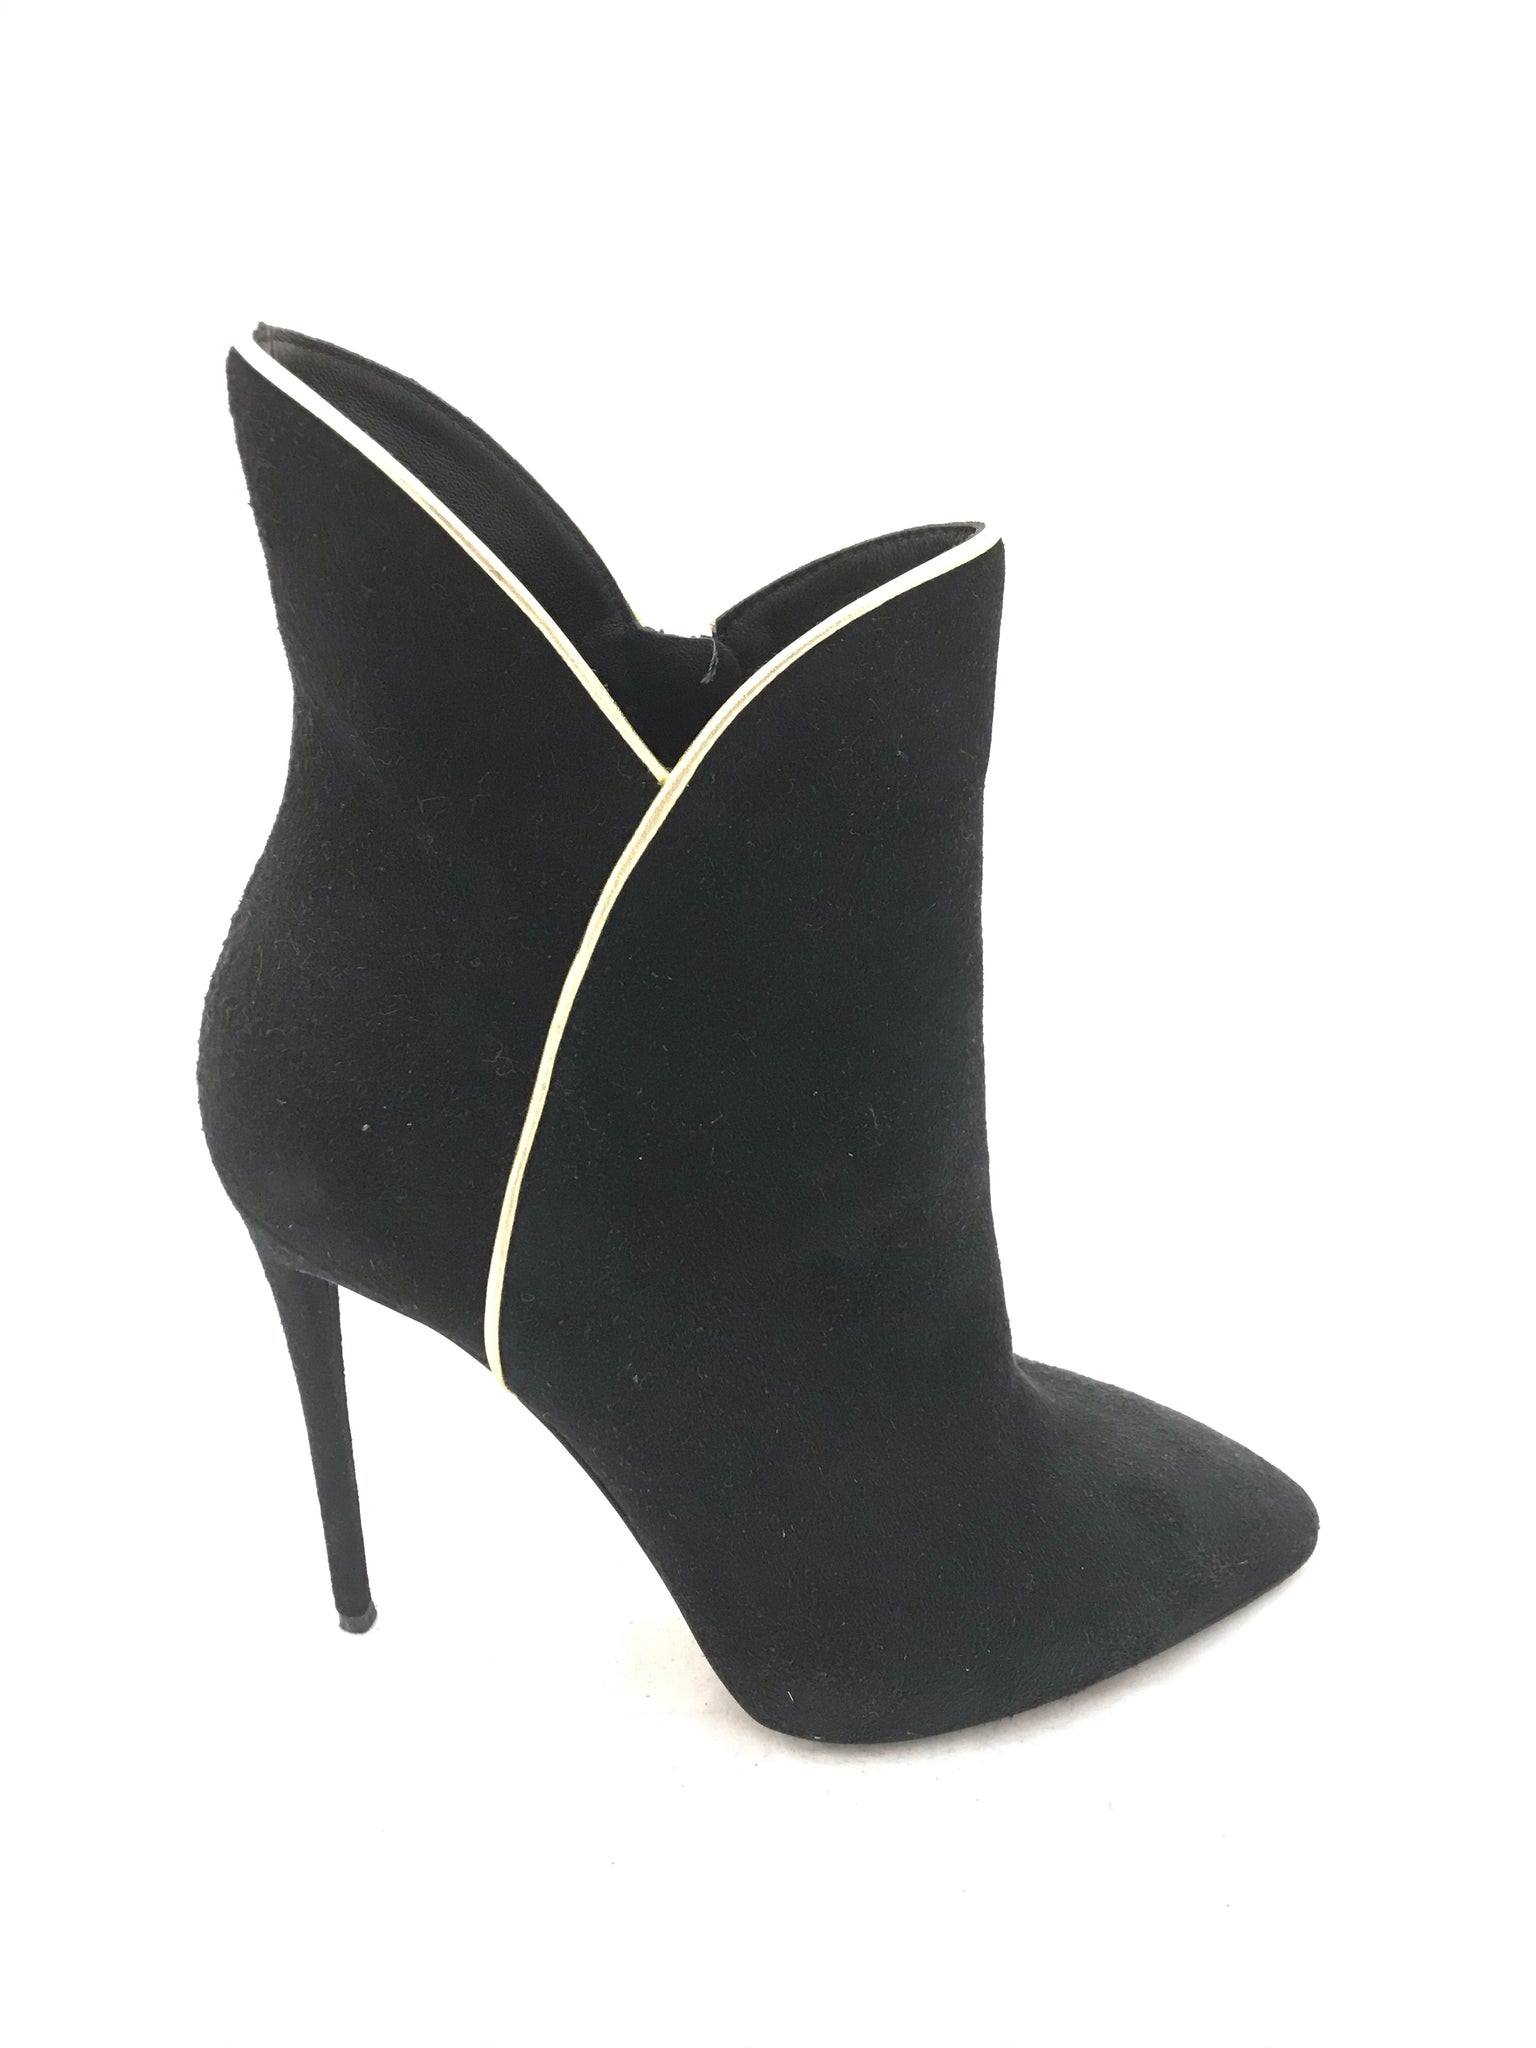 Isabella's Wardrobe Giuseppe Zanotti Suede Shoeboots with Gold Piping.